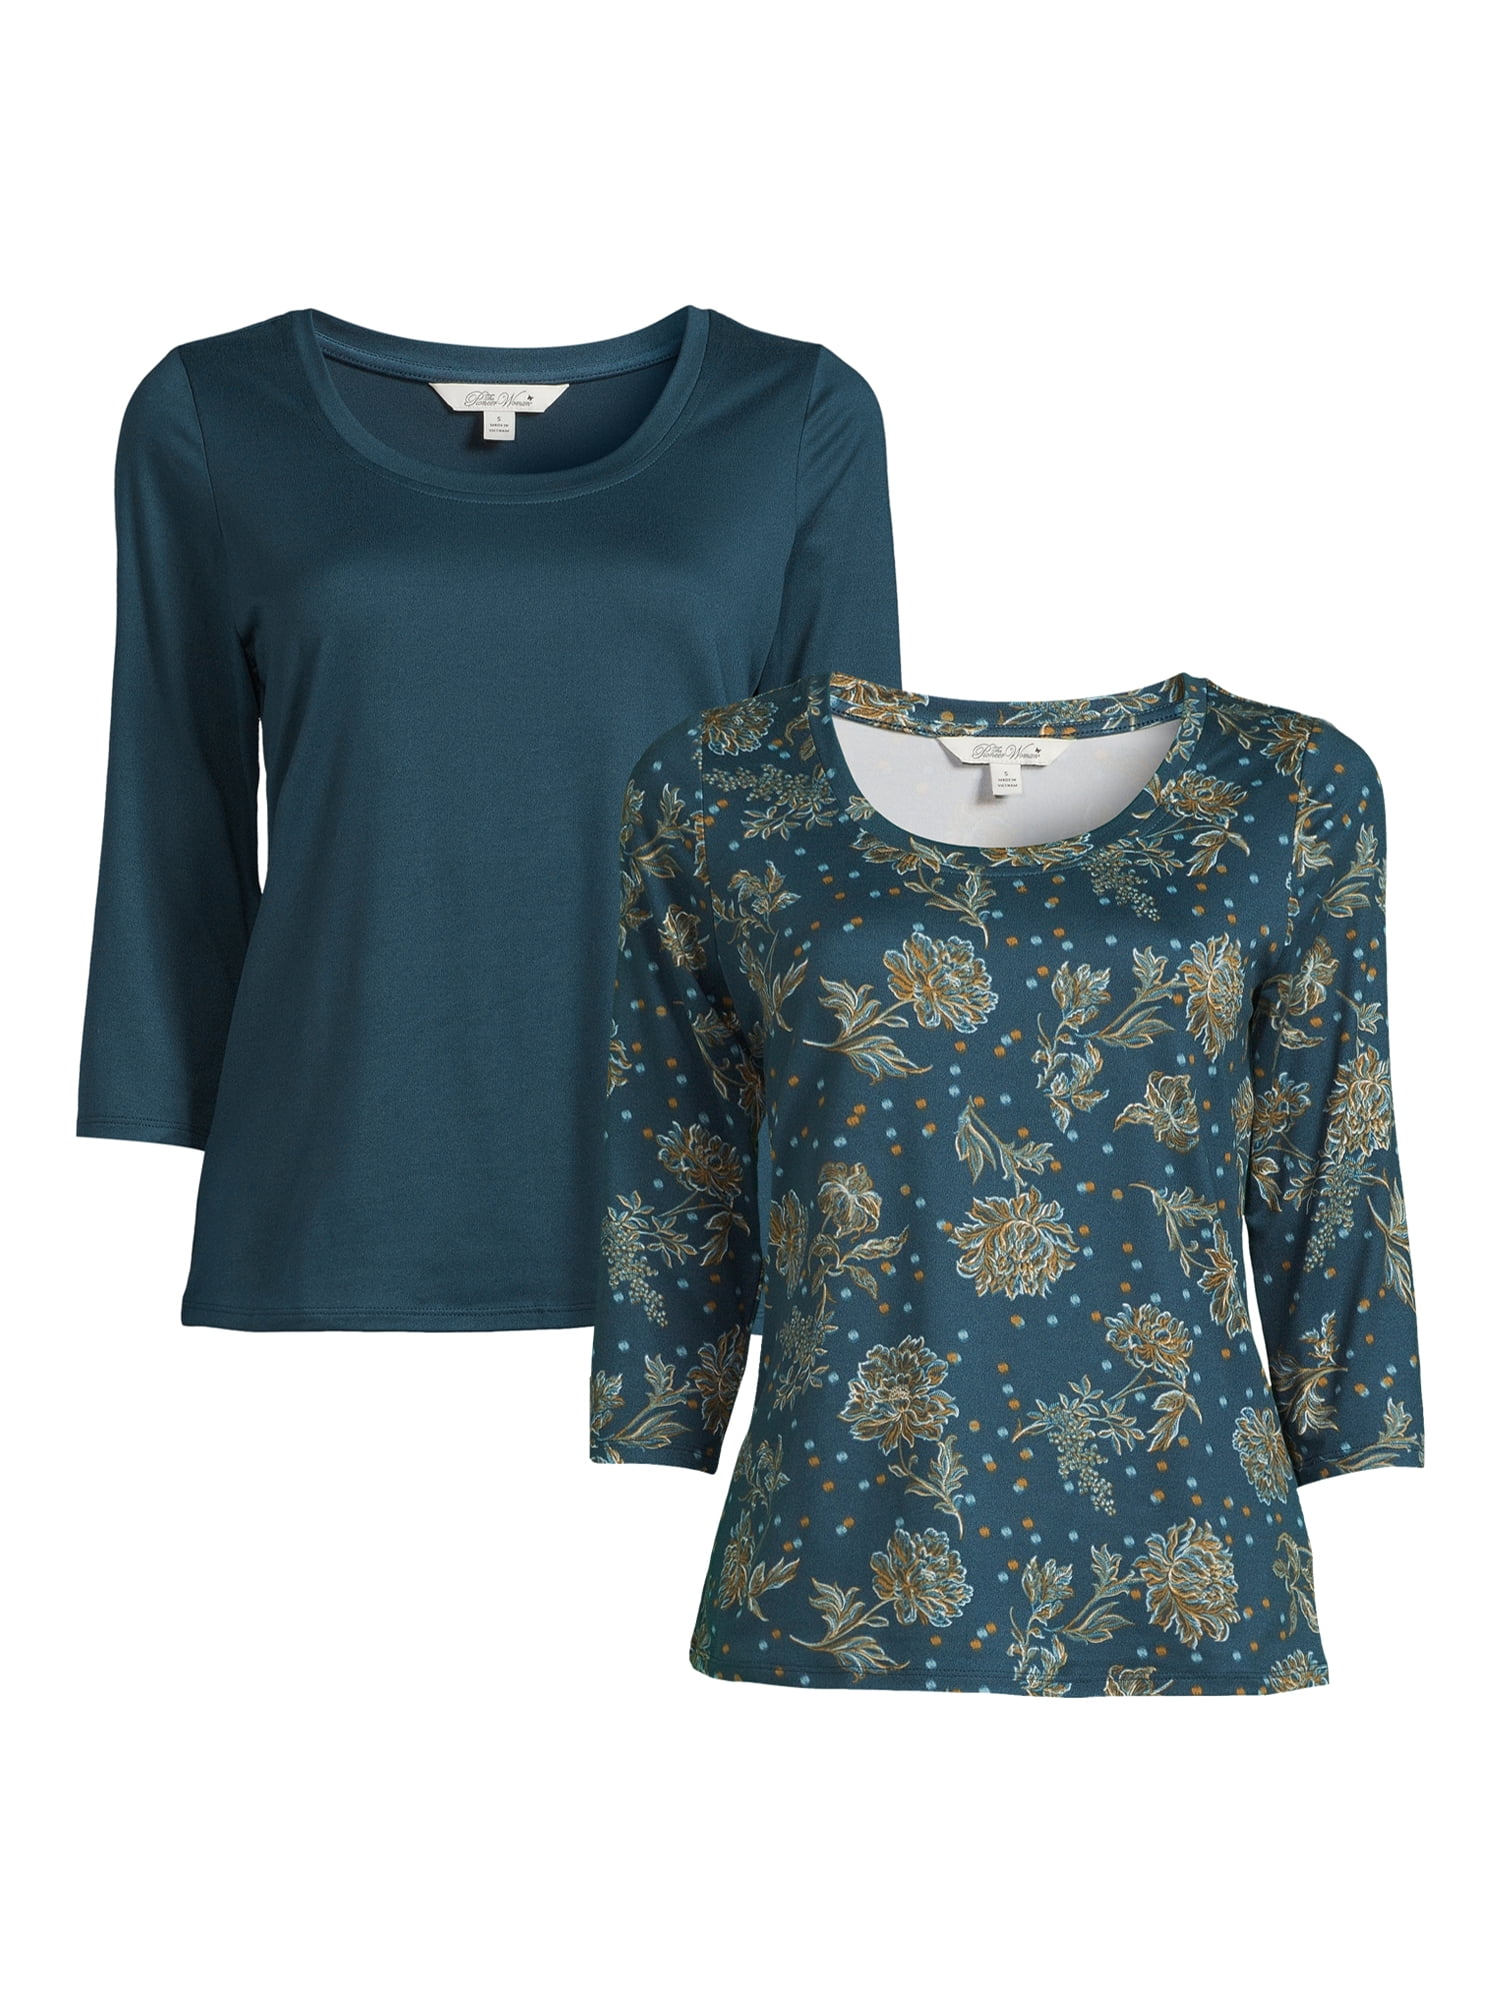 The Pioneer Woman 3/4 Sleeve Scoop Neck T-Shirt, 2-Pack, Sizes XS-3X - Walmart.com